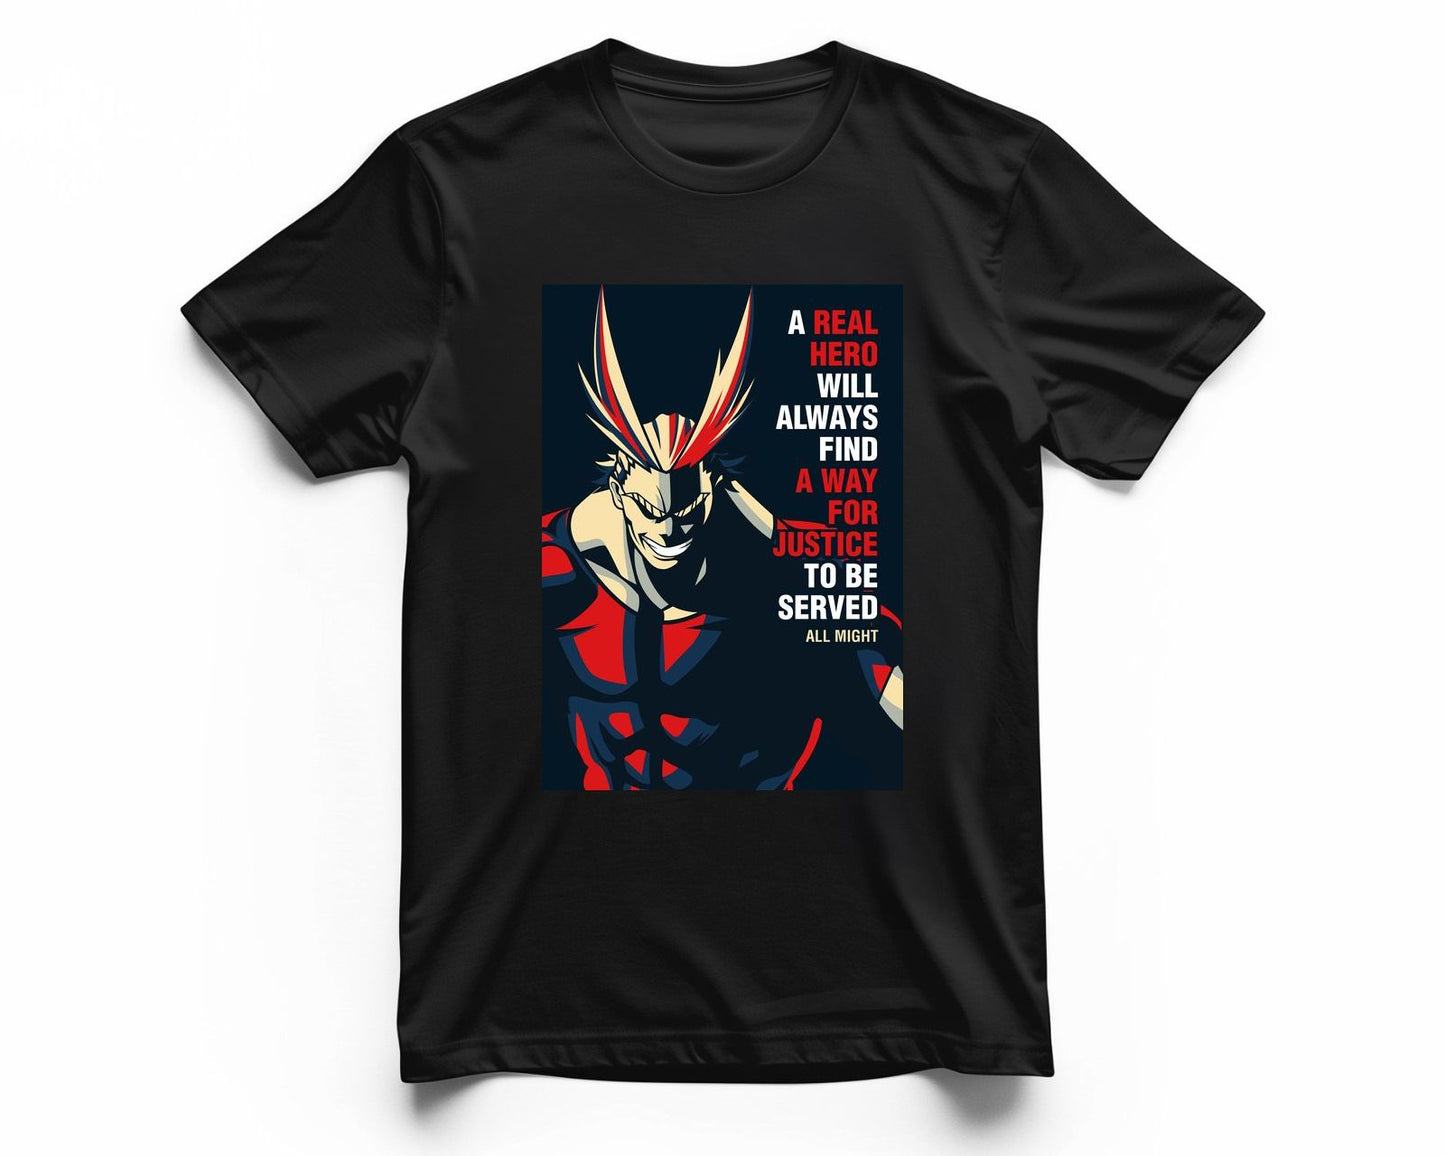 All Might Smile Quotes - @HidayahCreative